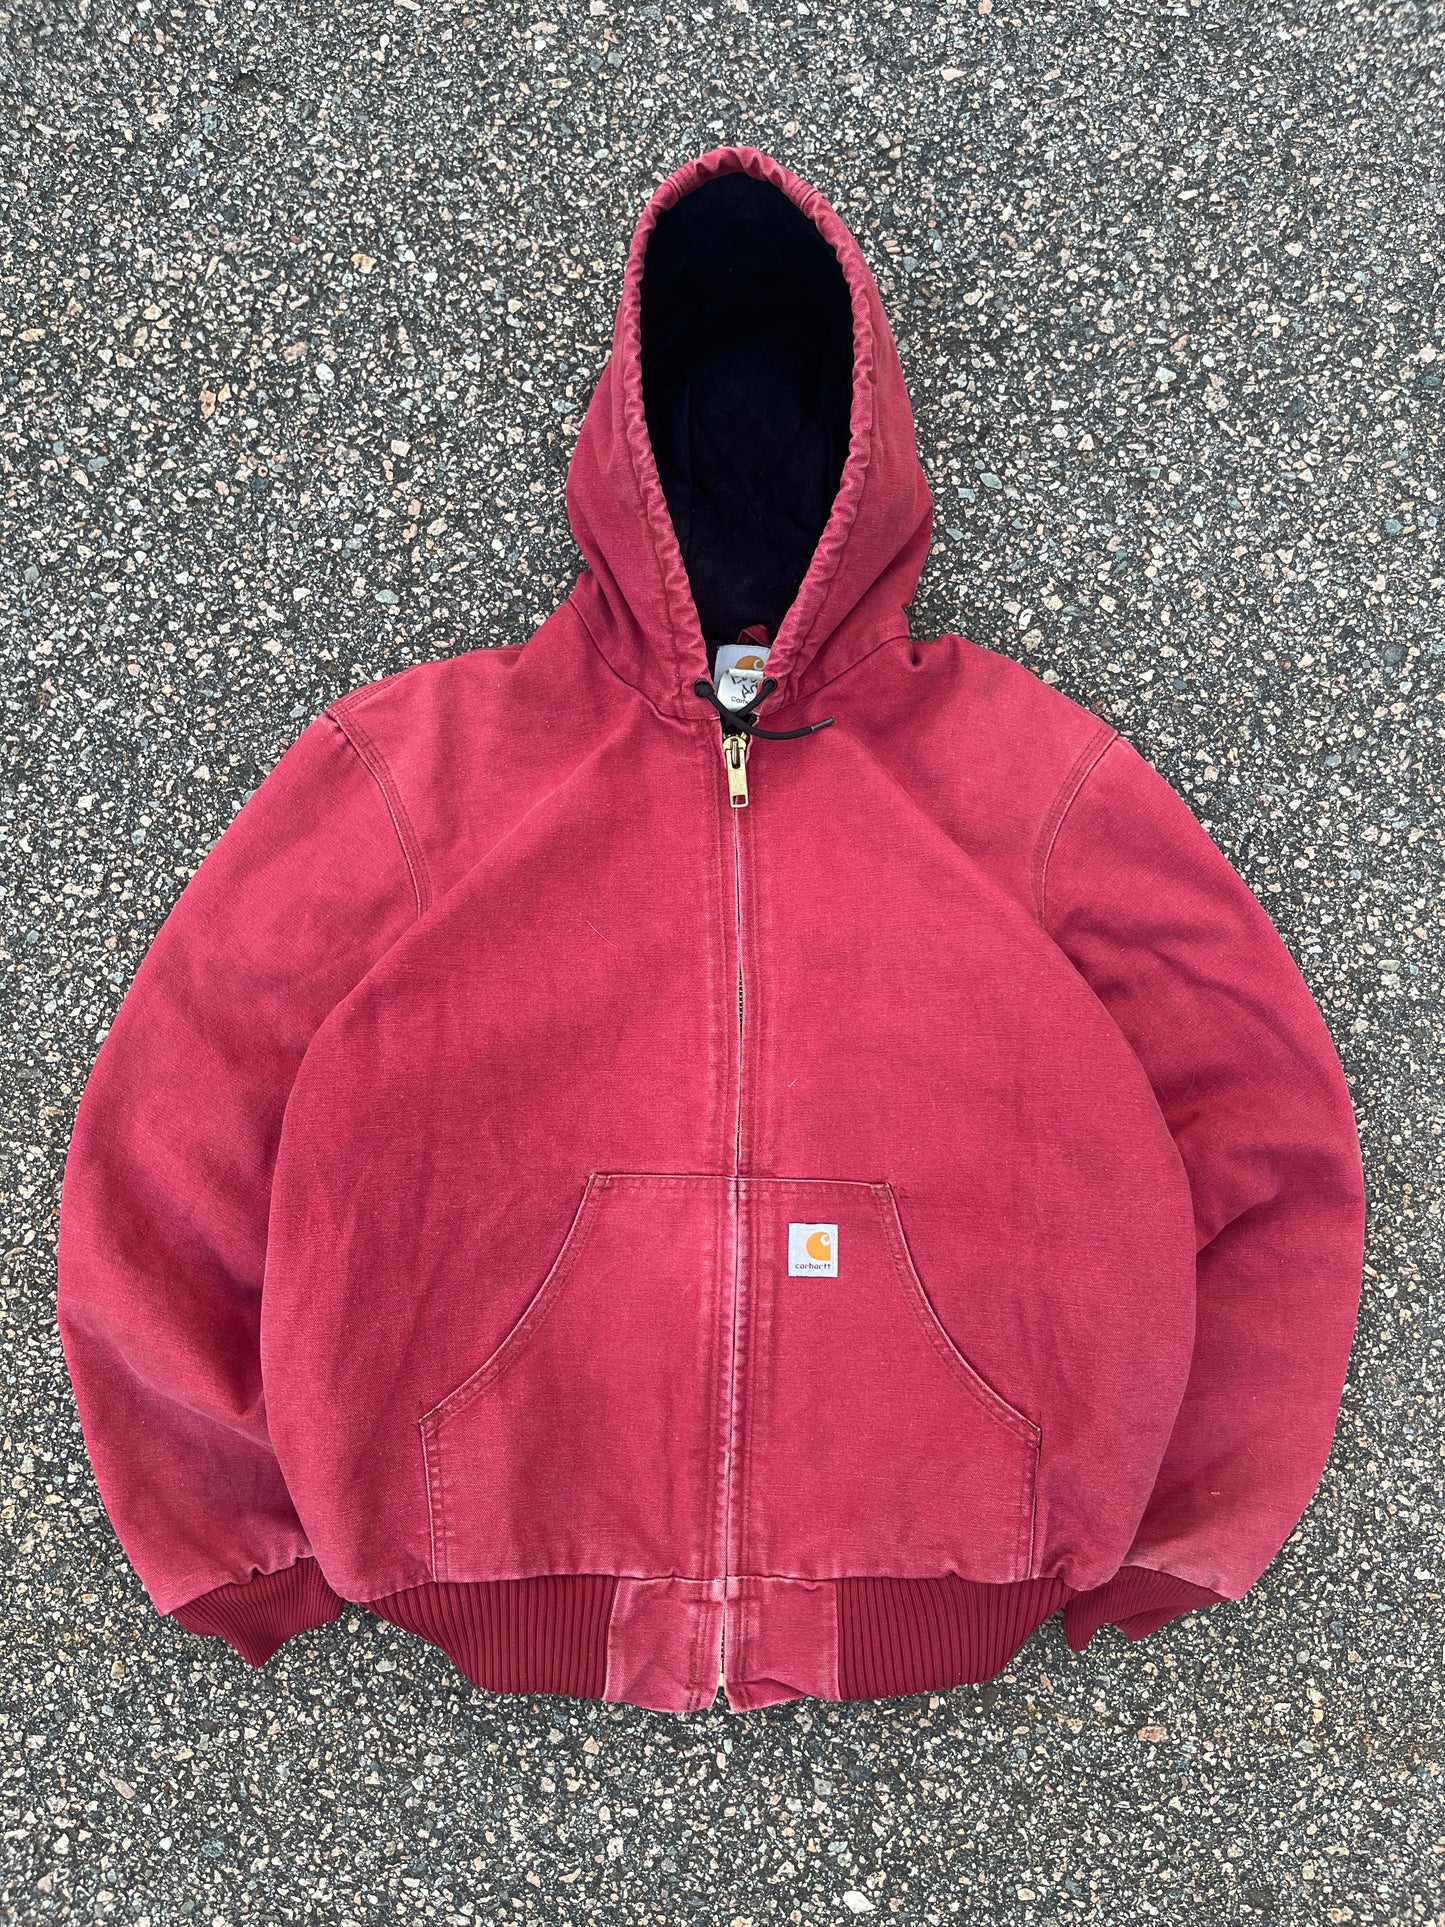 Faded Cherry Red Carhartt Active Jacket - Fits M-L